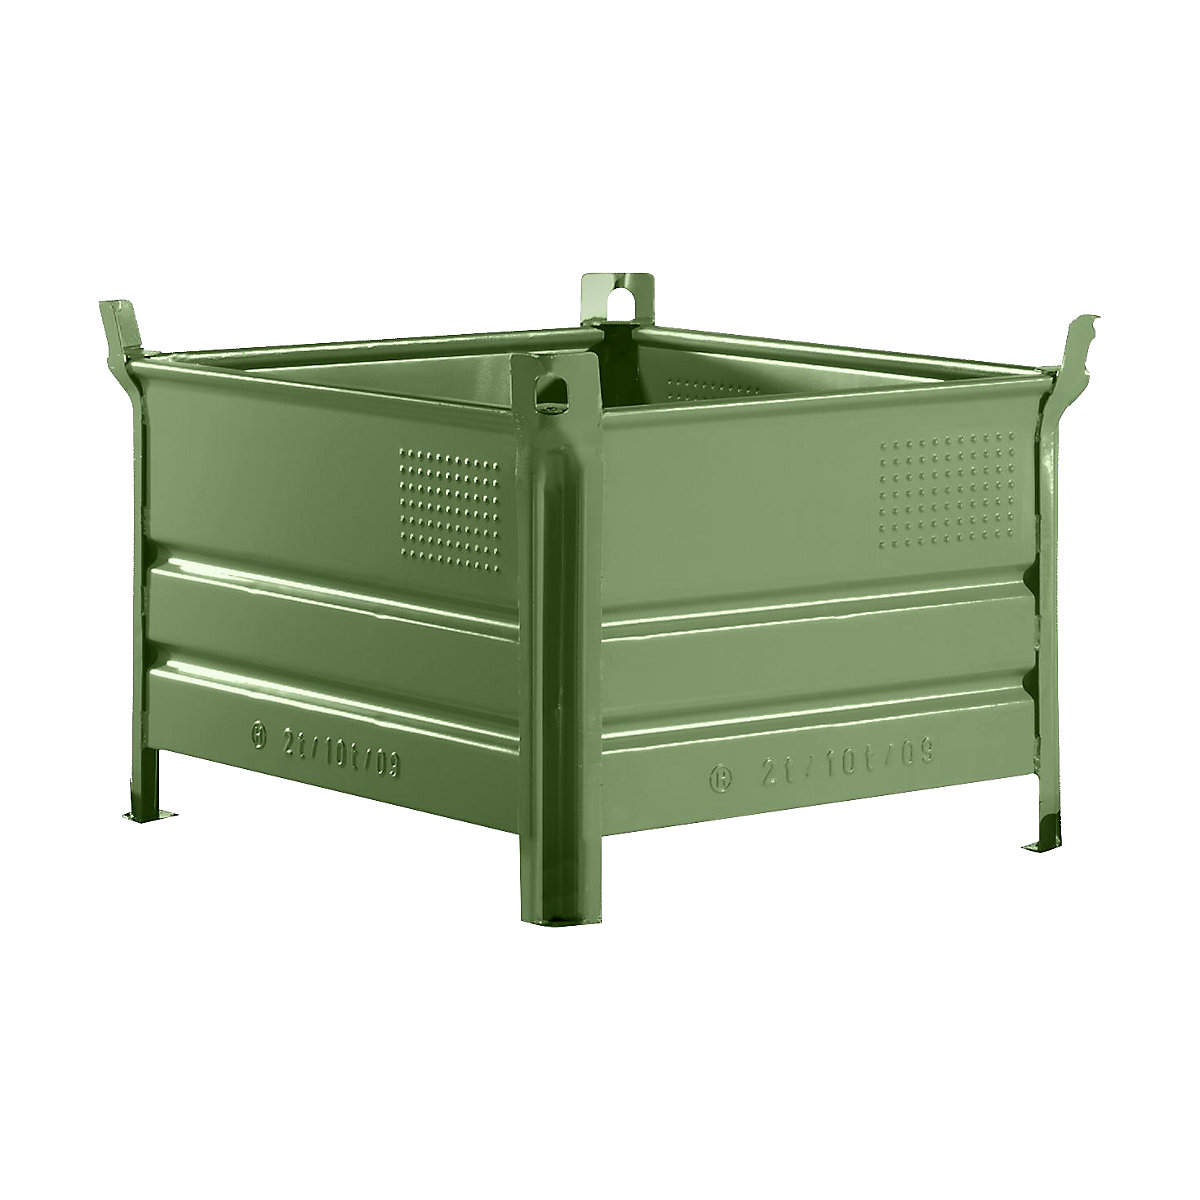 Stacking container with runners – Heson, LxW 1000 x 800 mm, max. load 1000 kg, green, 10+ items-5